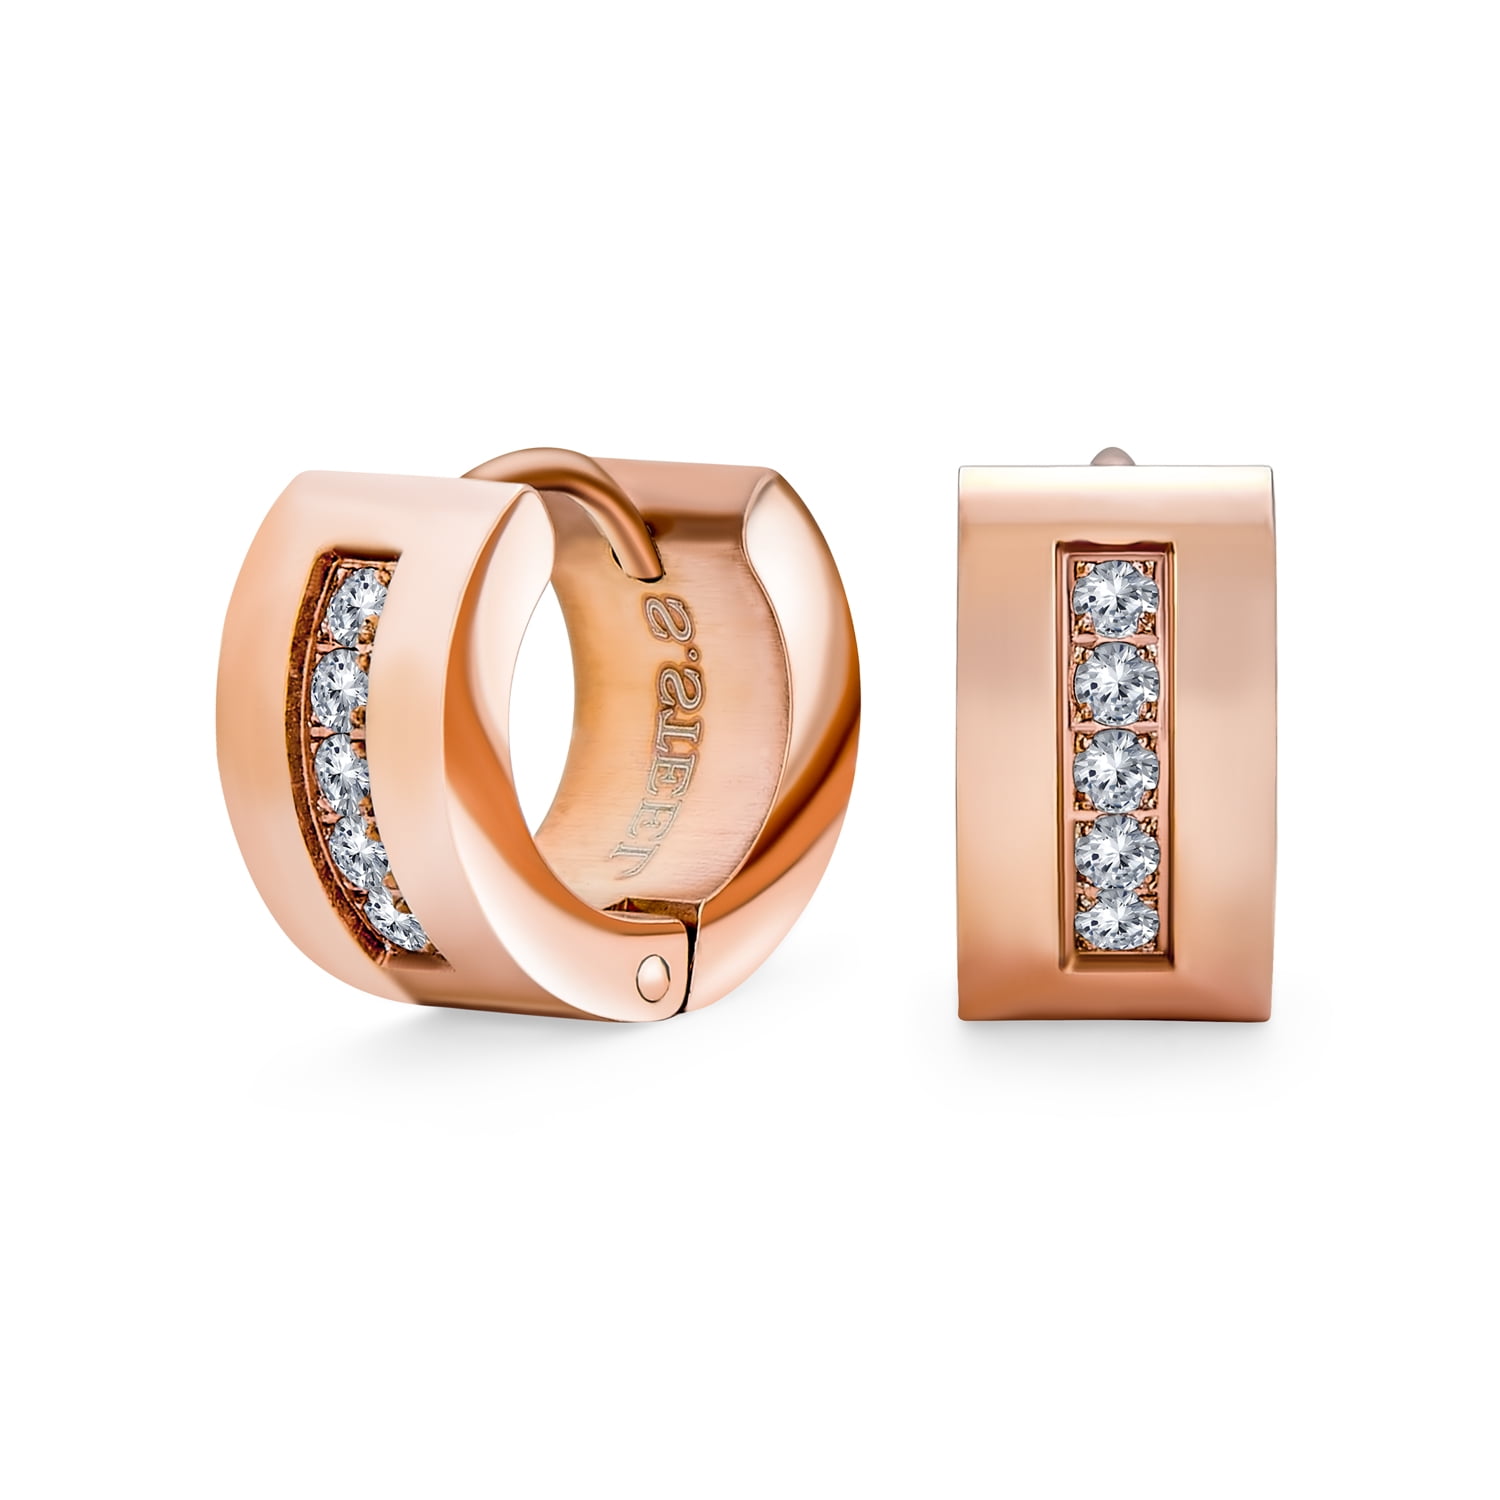 Stainless Steel Womens Roman Numerals Diamond Cubic Zirconia Rose Gold Circle Earrings 